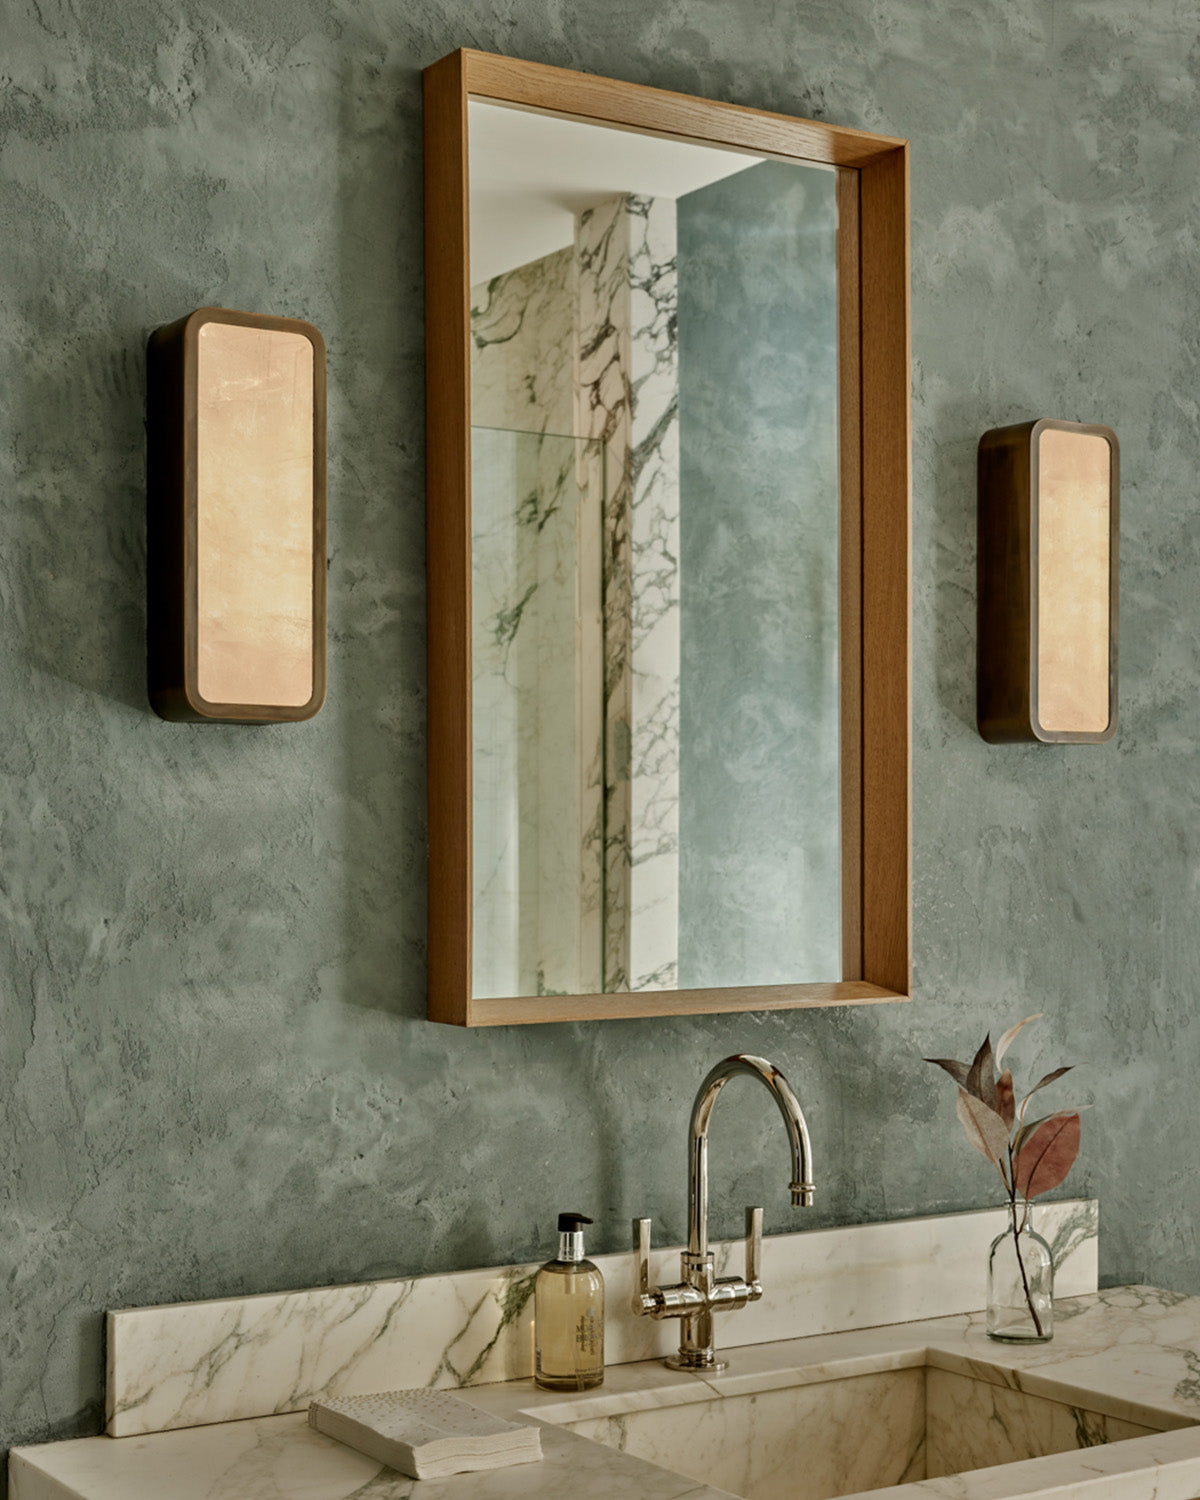 Robert True Ogden RTO Lighting - Two Tomer Sconce - Selenite Diffuser - Antique Brass Hung In Between a Mirror in a Bathroom#finish_antique-brass